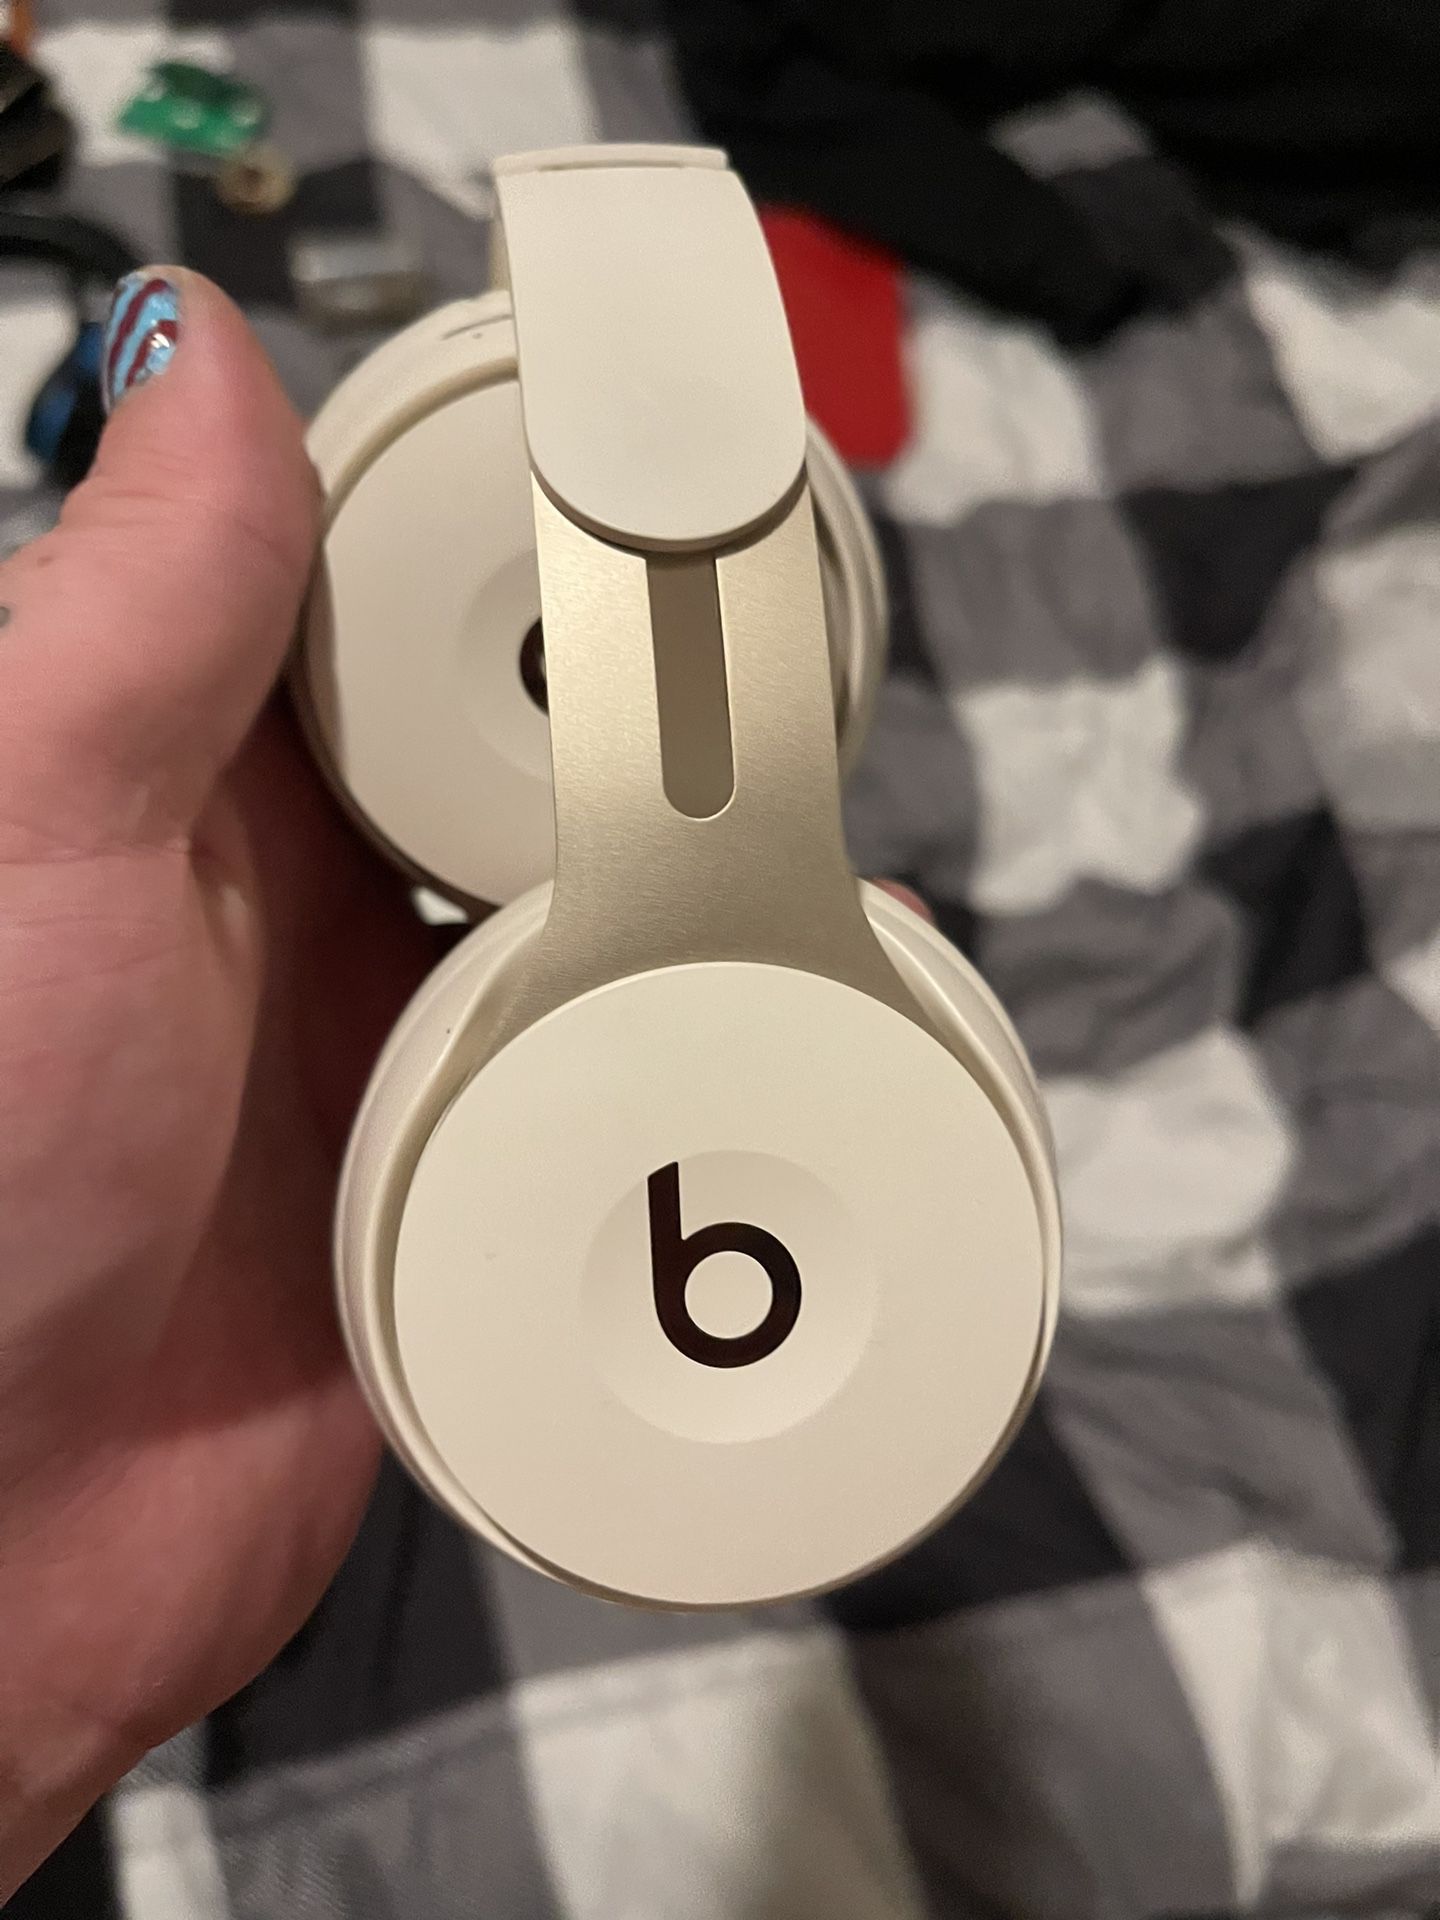 LIMITED EDITION BEATS BY DRE SOLO 3’s